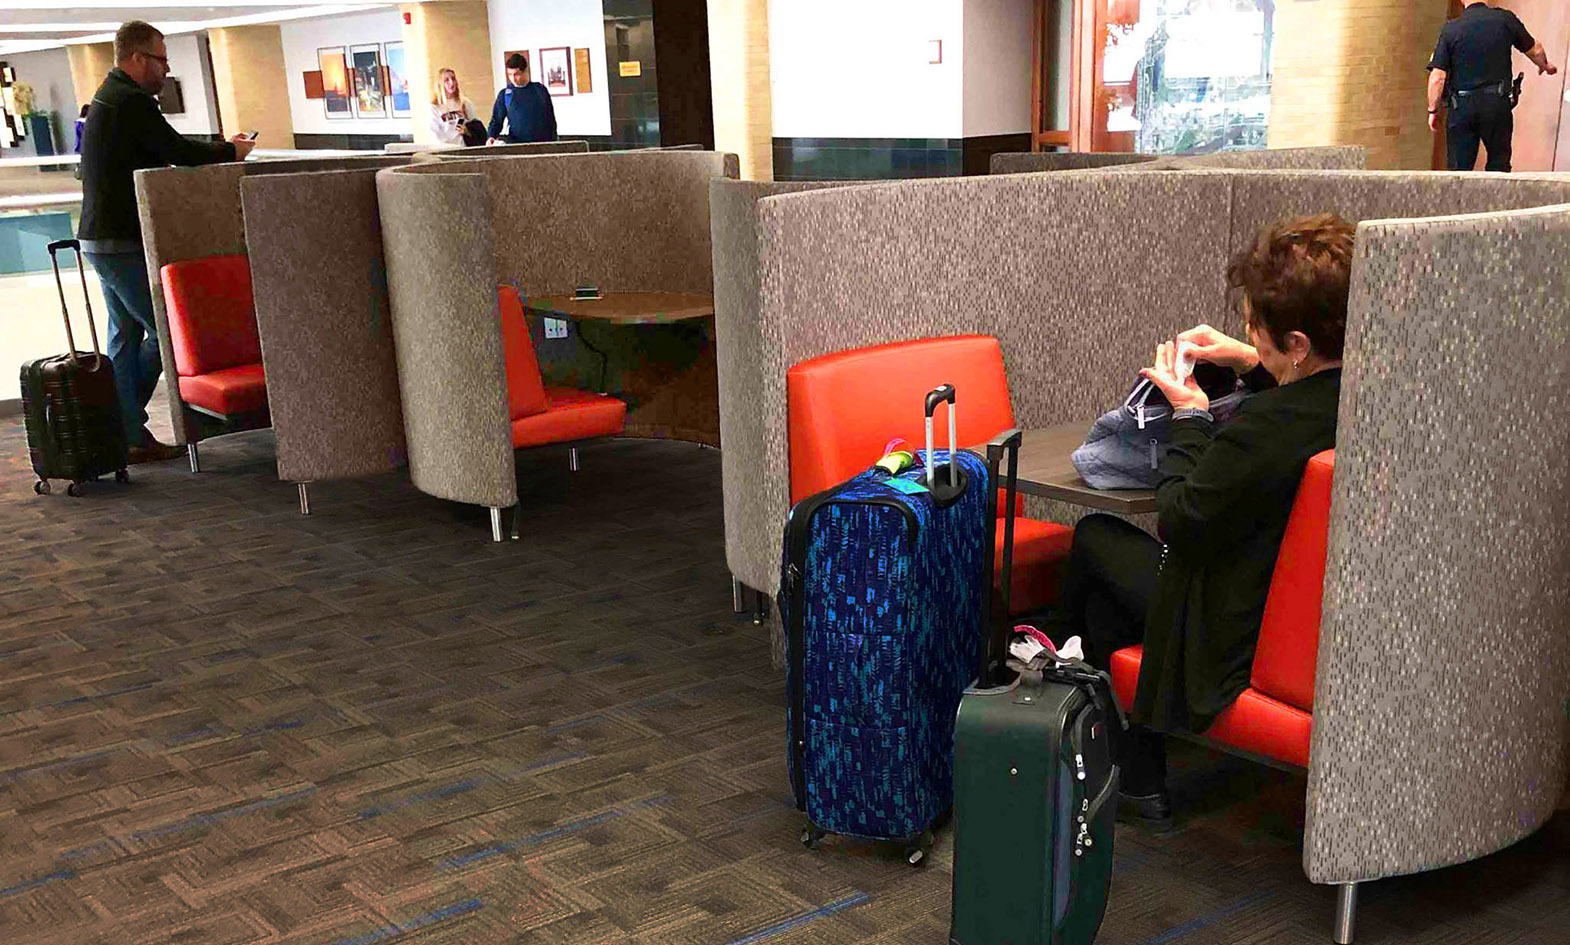 airport privacy seating